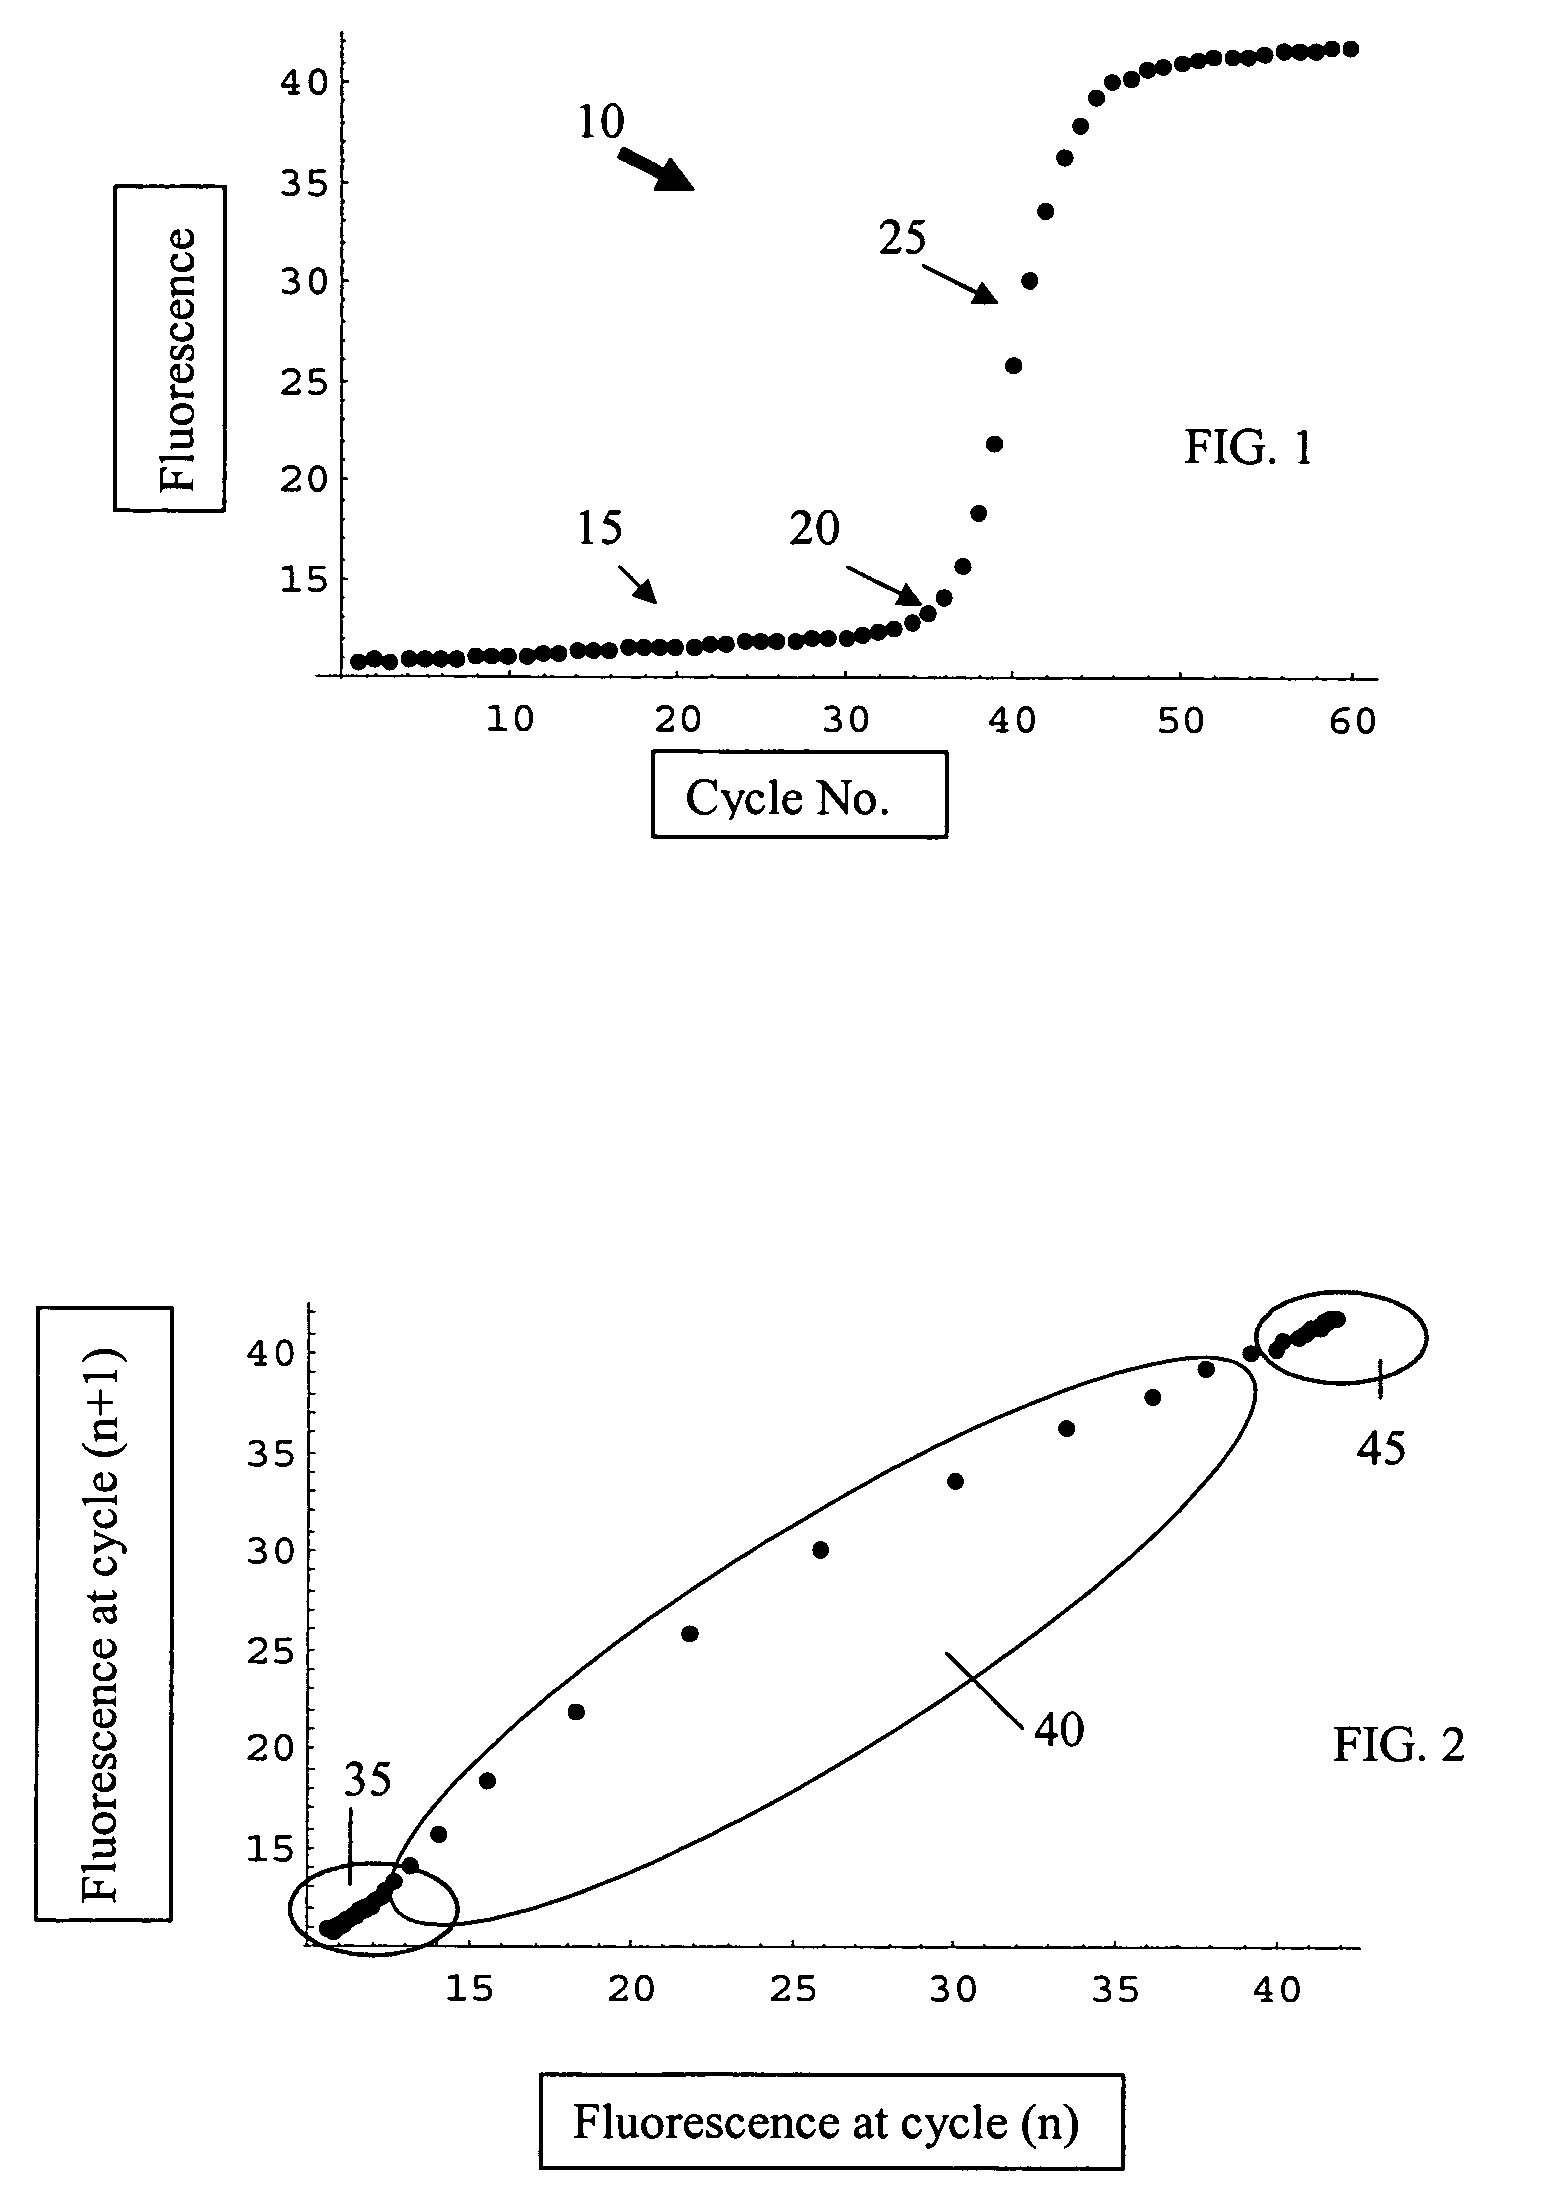 Systems and methods for determining real-time PCR cycle thresholds using cluster analysis